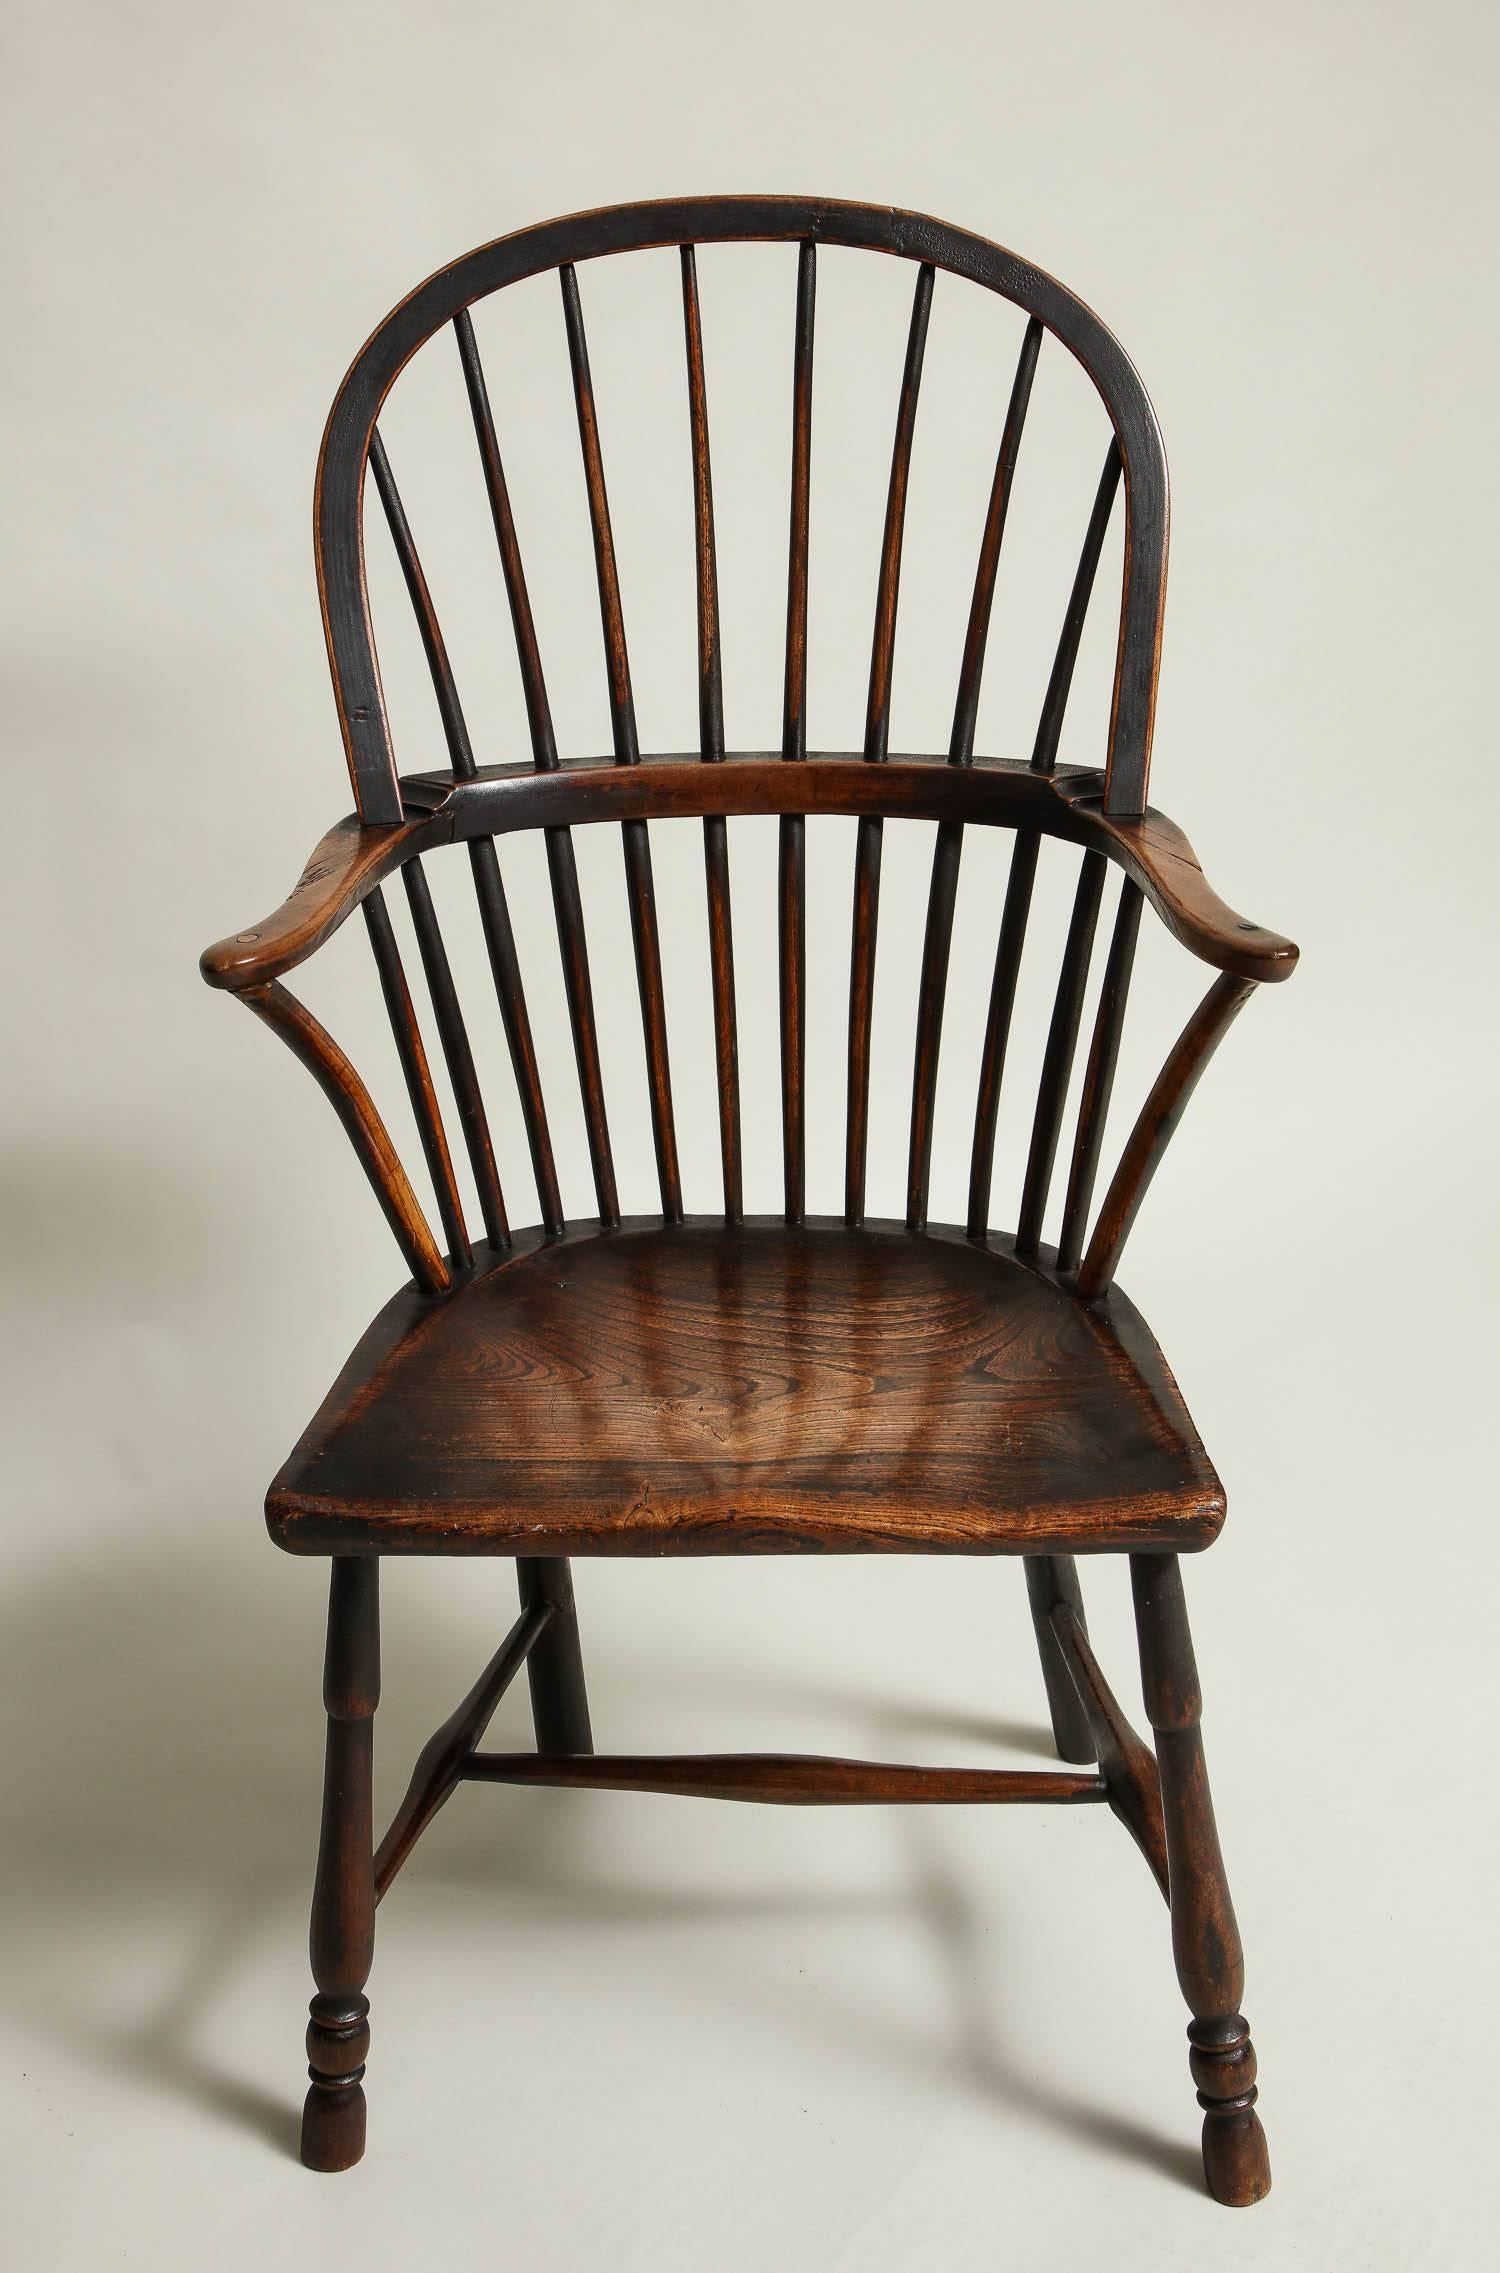 Fine 18th century, English hoop back Windsor armchair in ash, elm and fruitwood, the bent bow back with eight spindles supporting top hoop, the braced arm with stepped construction and supported by four additional spindles and bentwood struts on